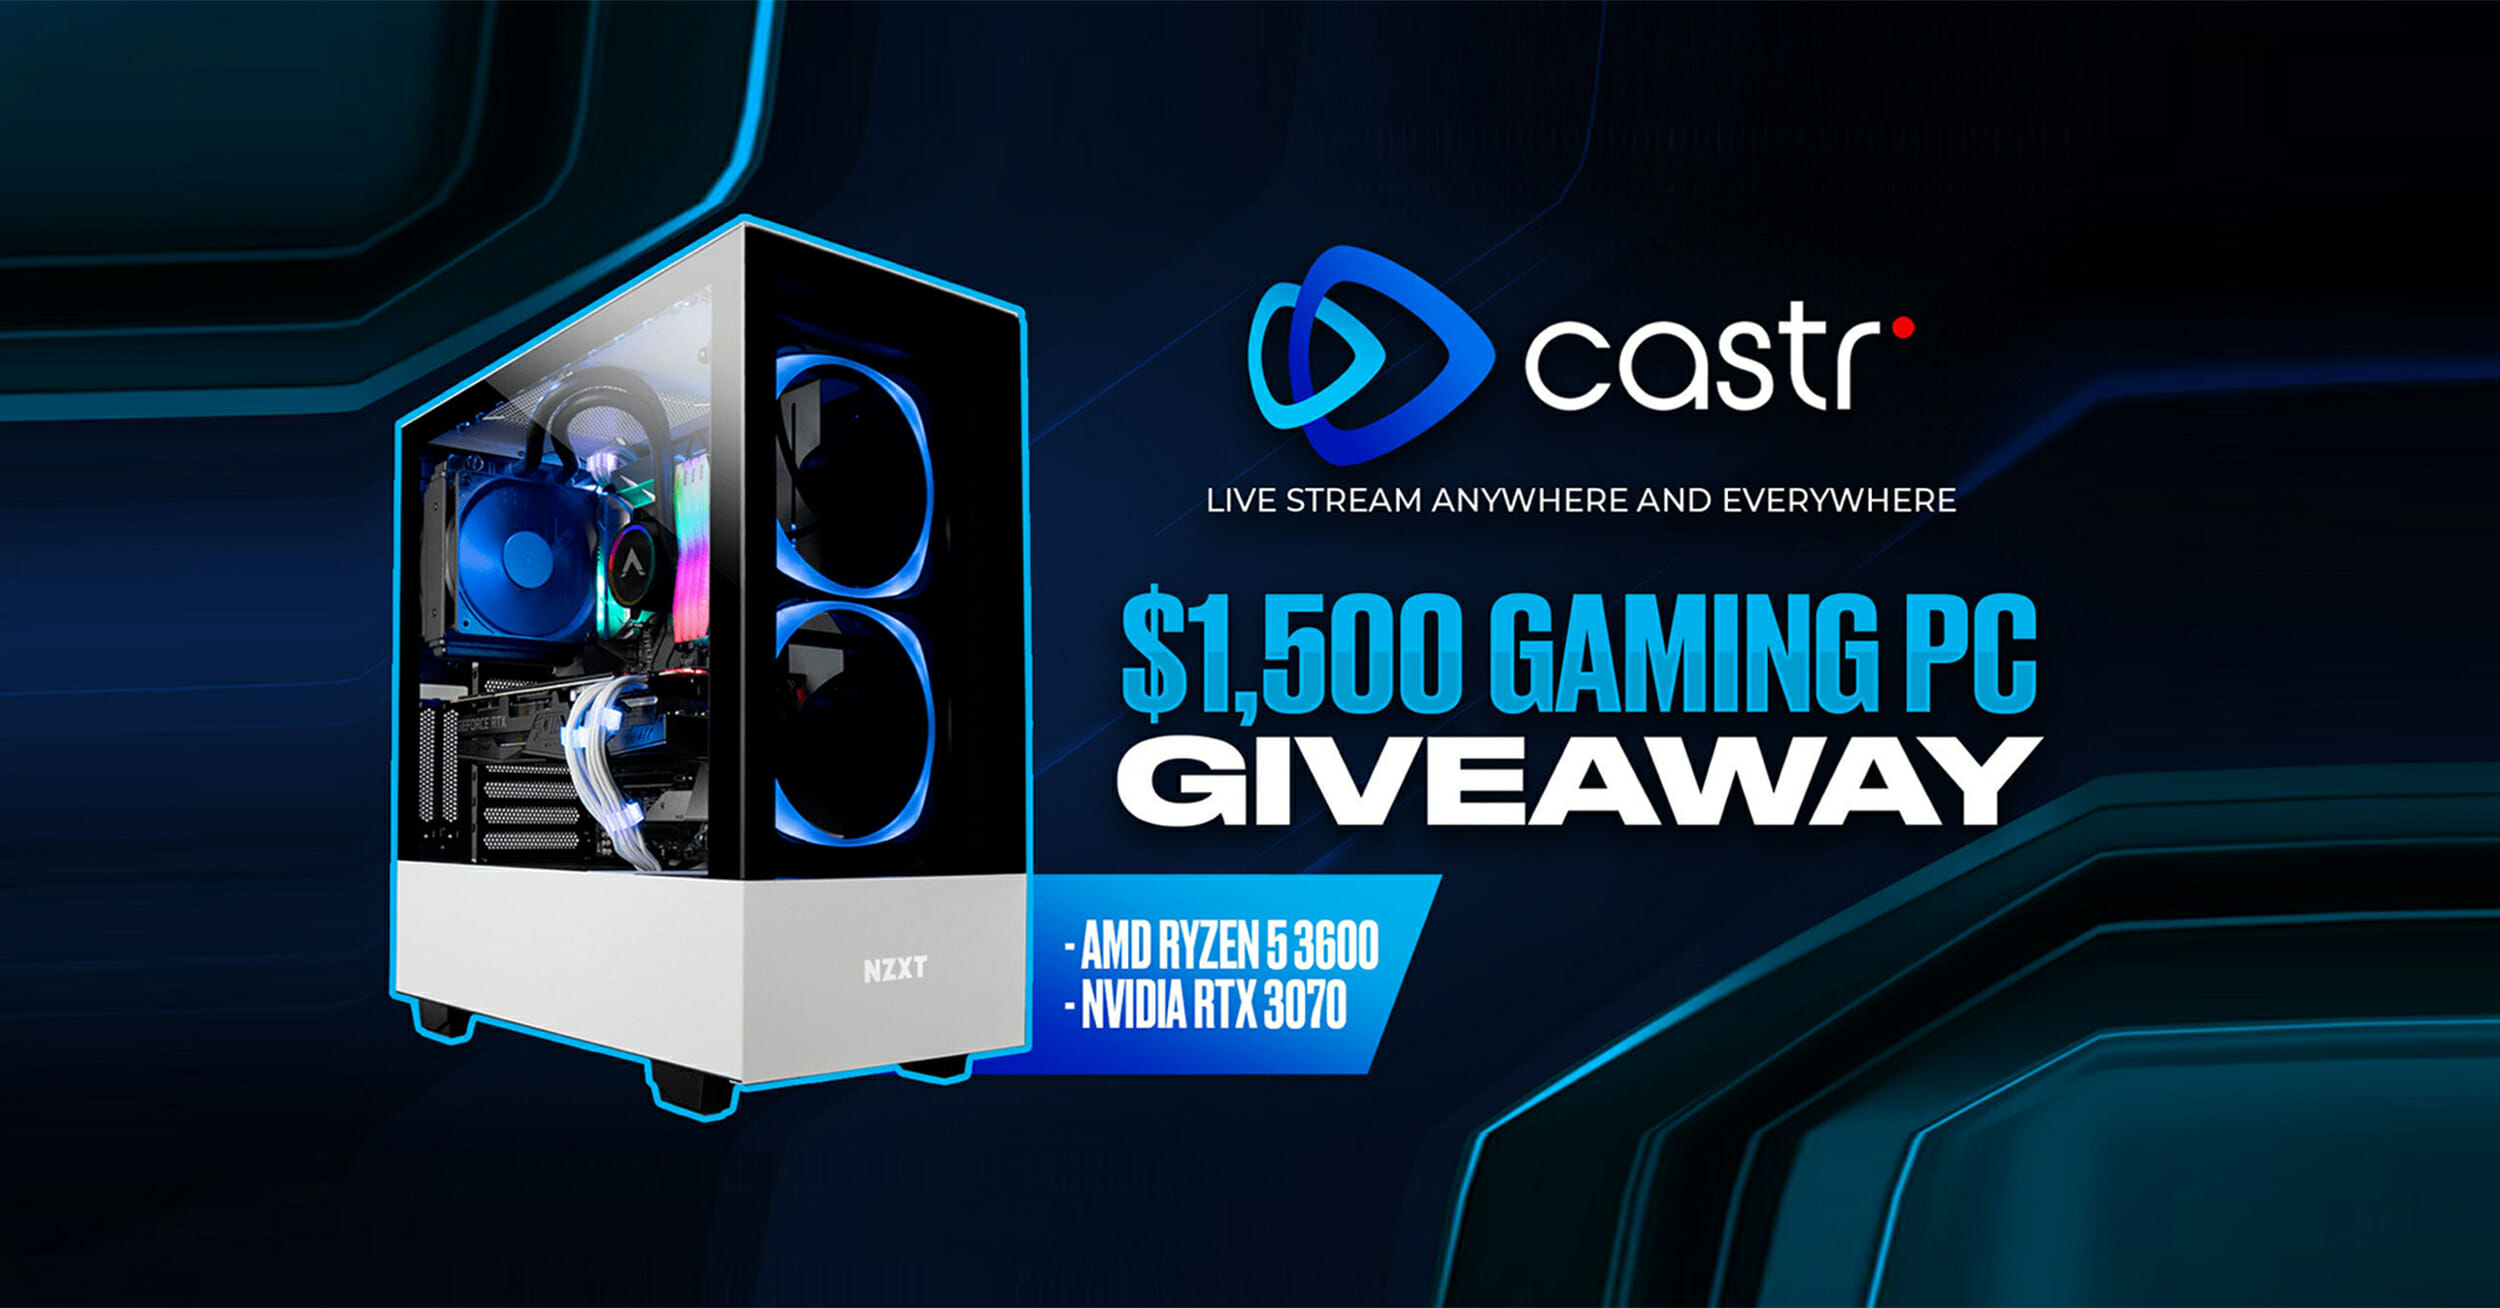 Castr 2021 New Year Giveaway: $1,500 Gaming PC. Enter Now!